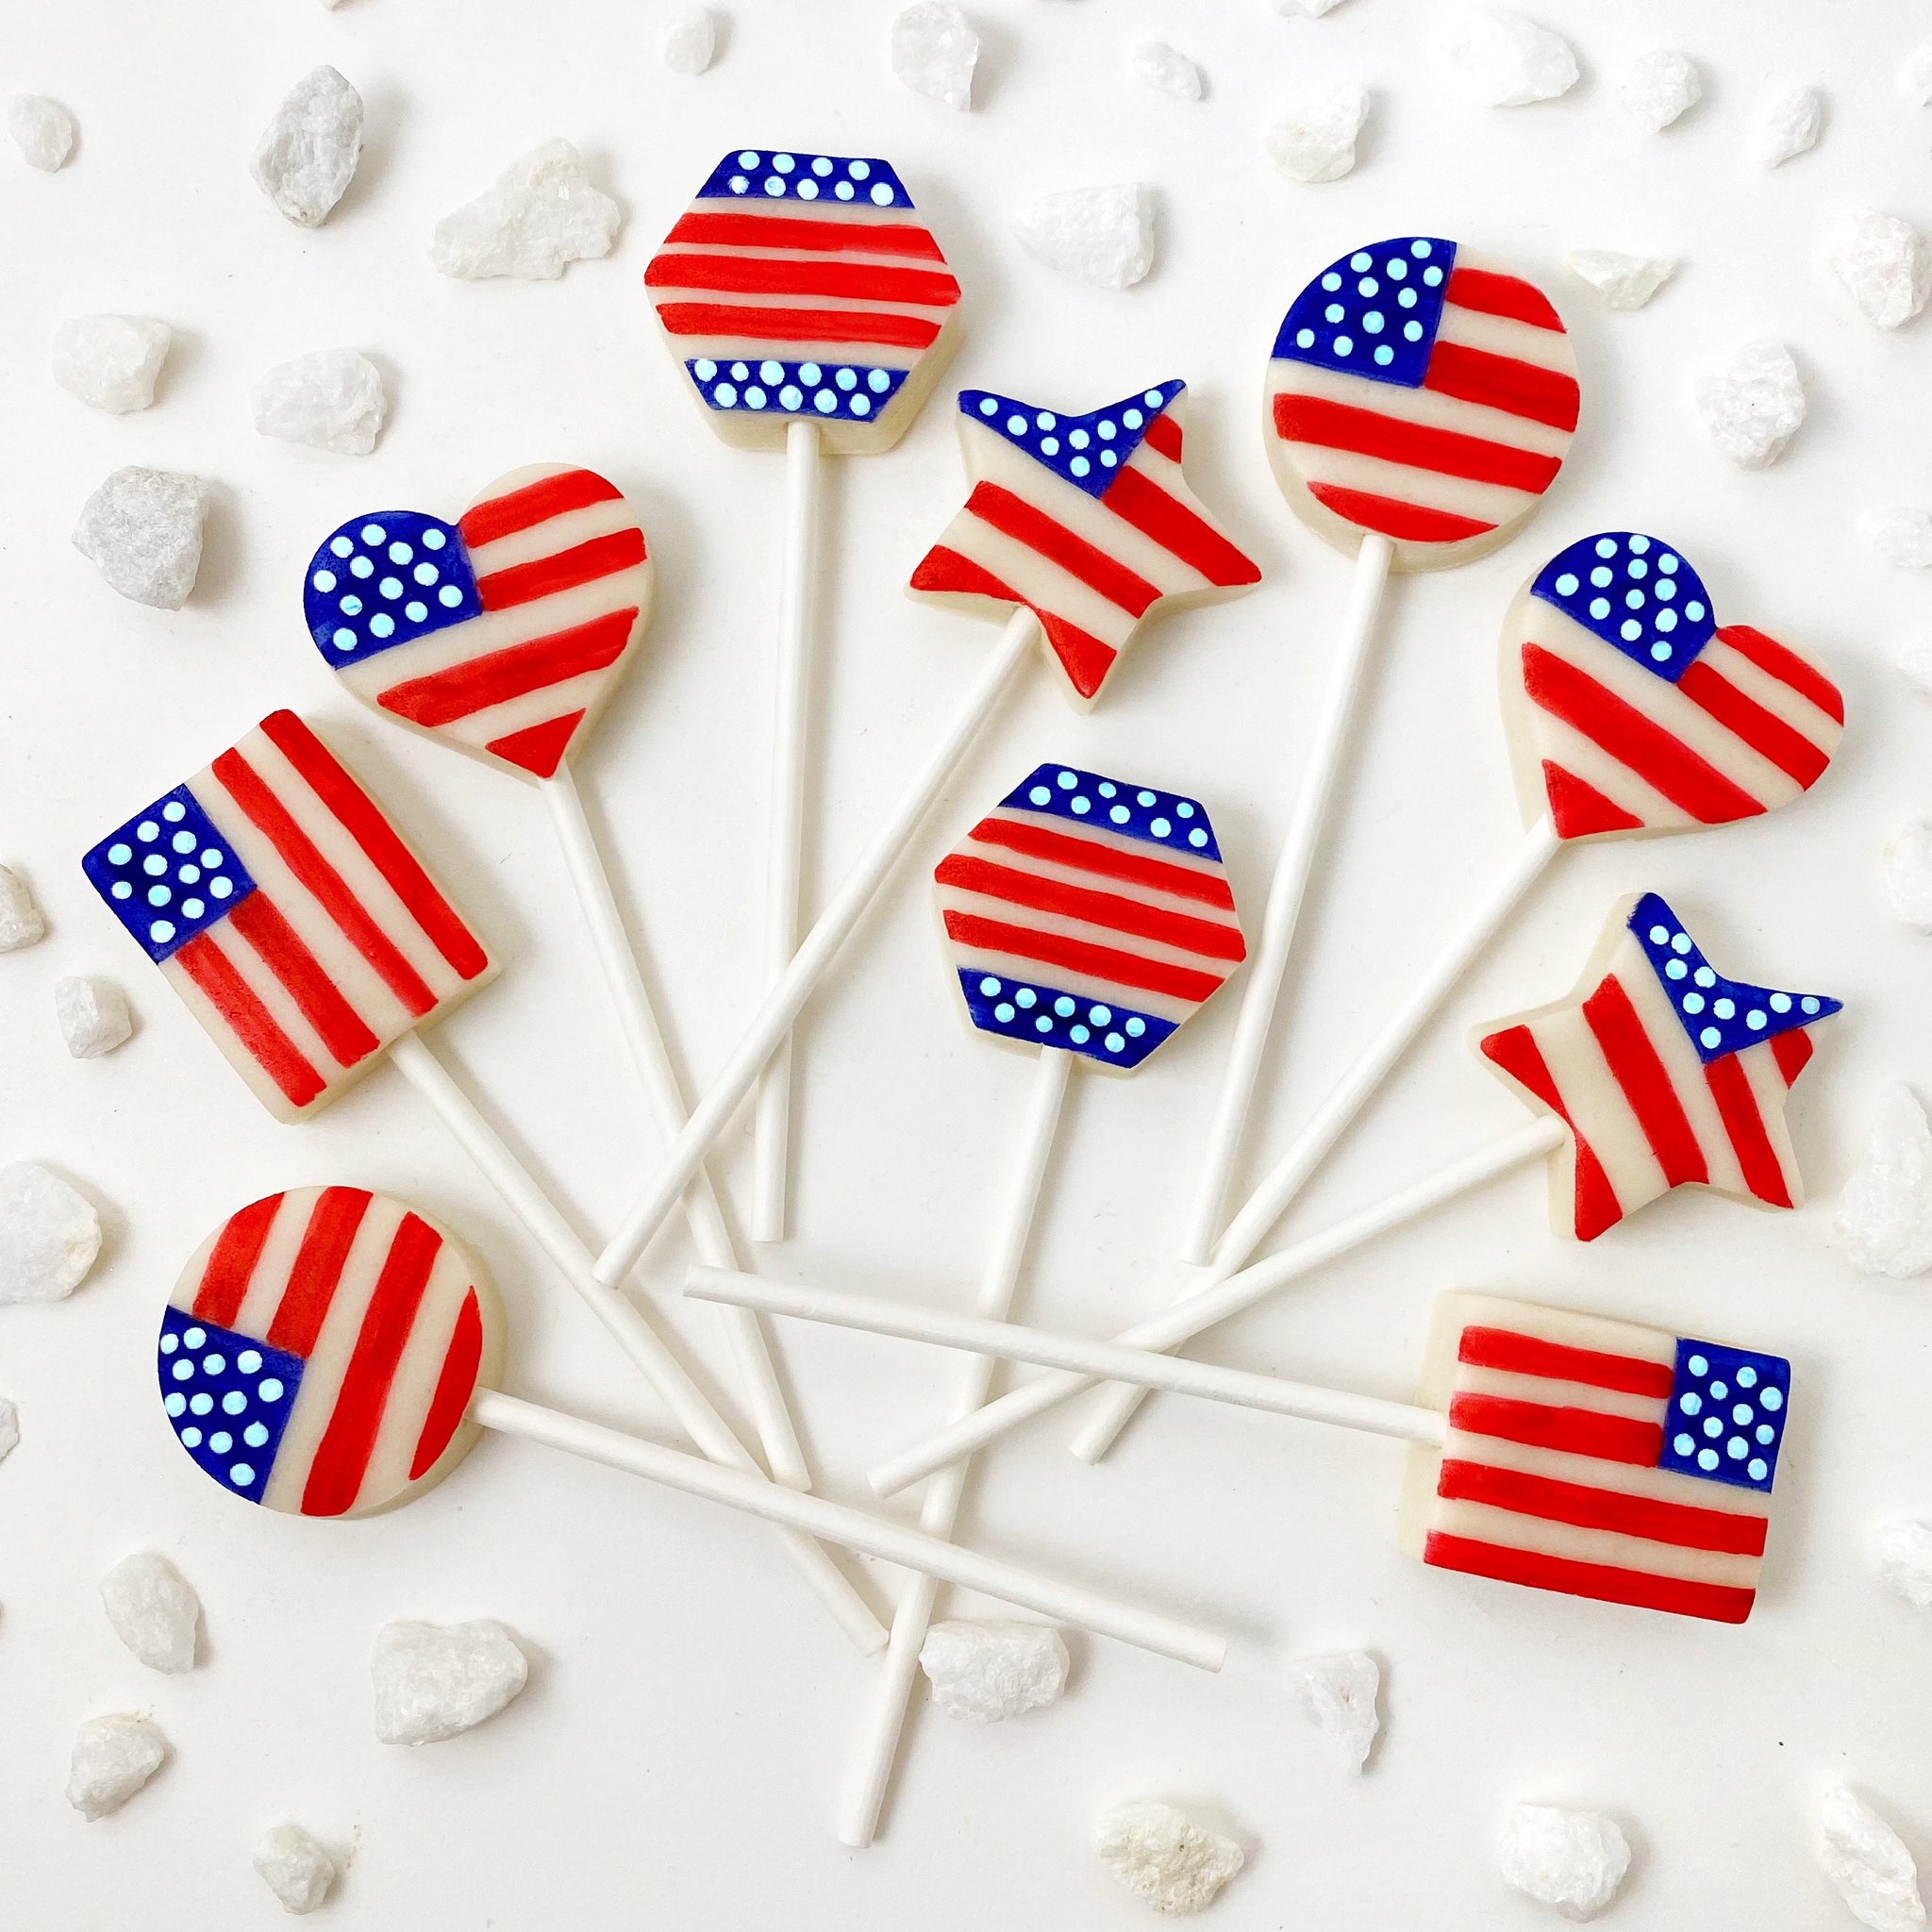 July 4th USA Independence Day stars and stripes in assorted shapes marzipan candy lollipops